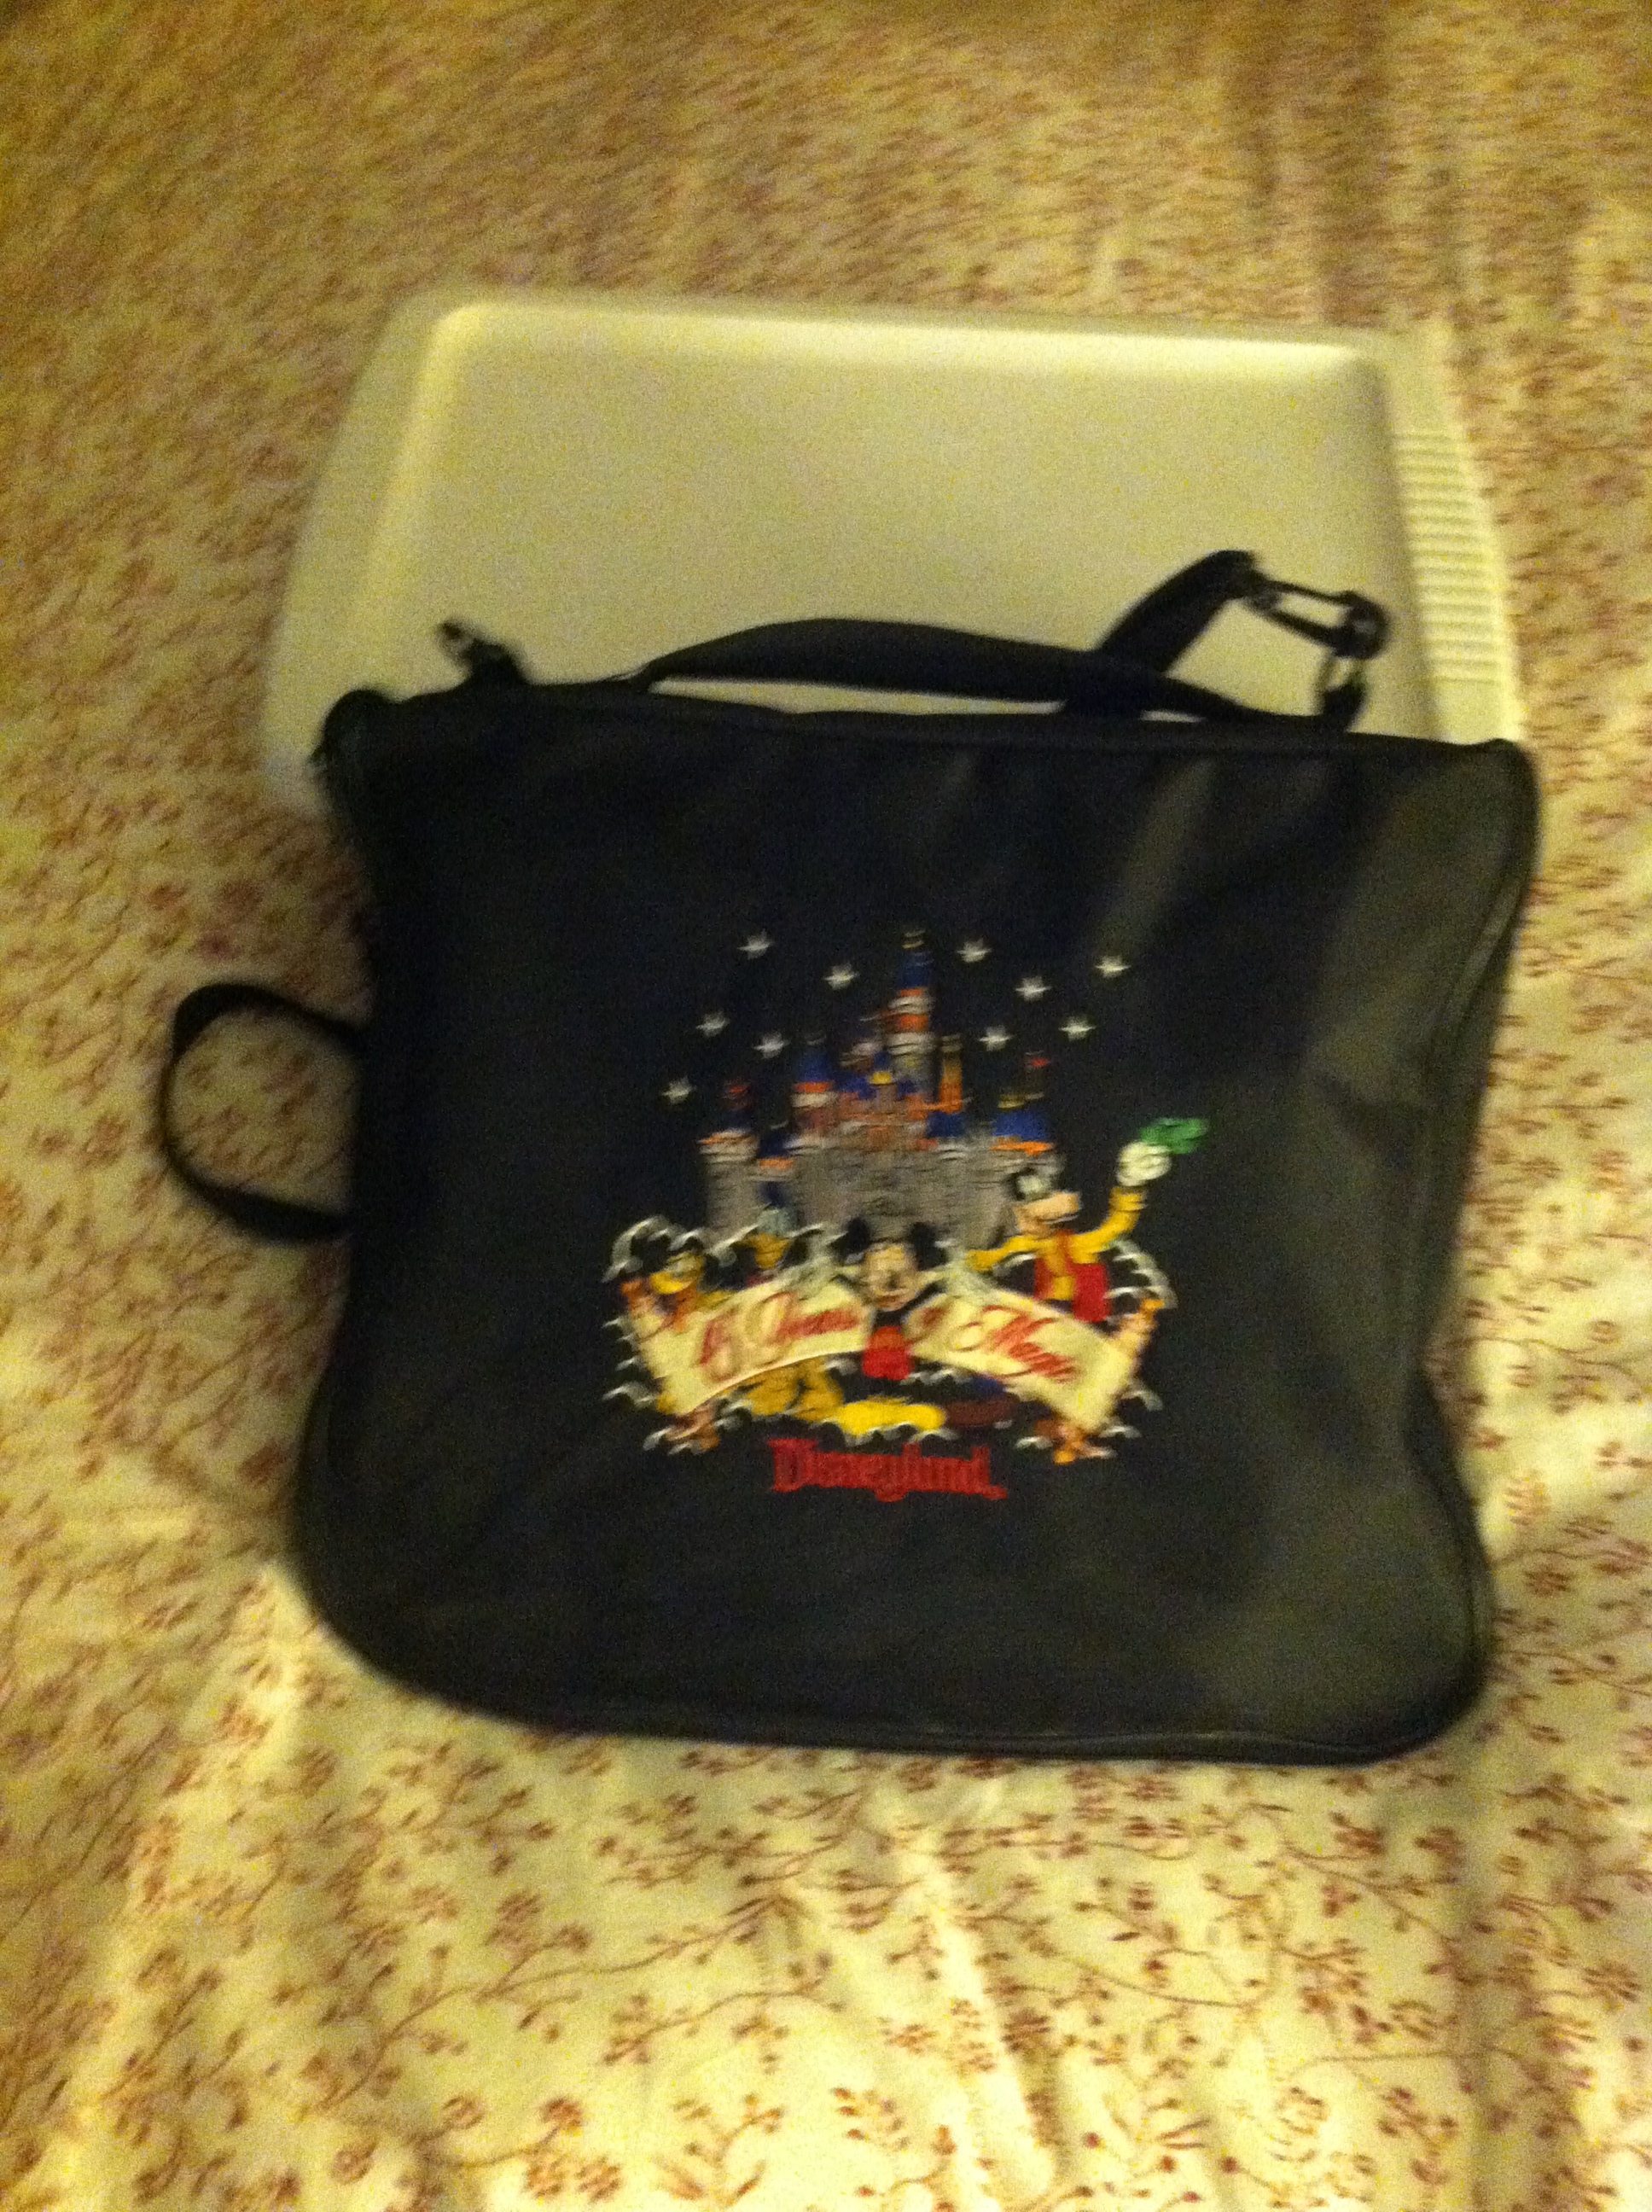  My pin bag and a plastic container full of pins = My Shameful Past 